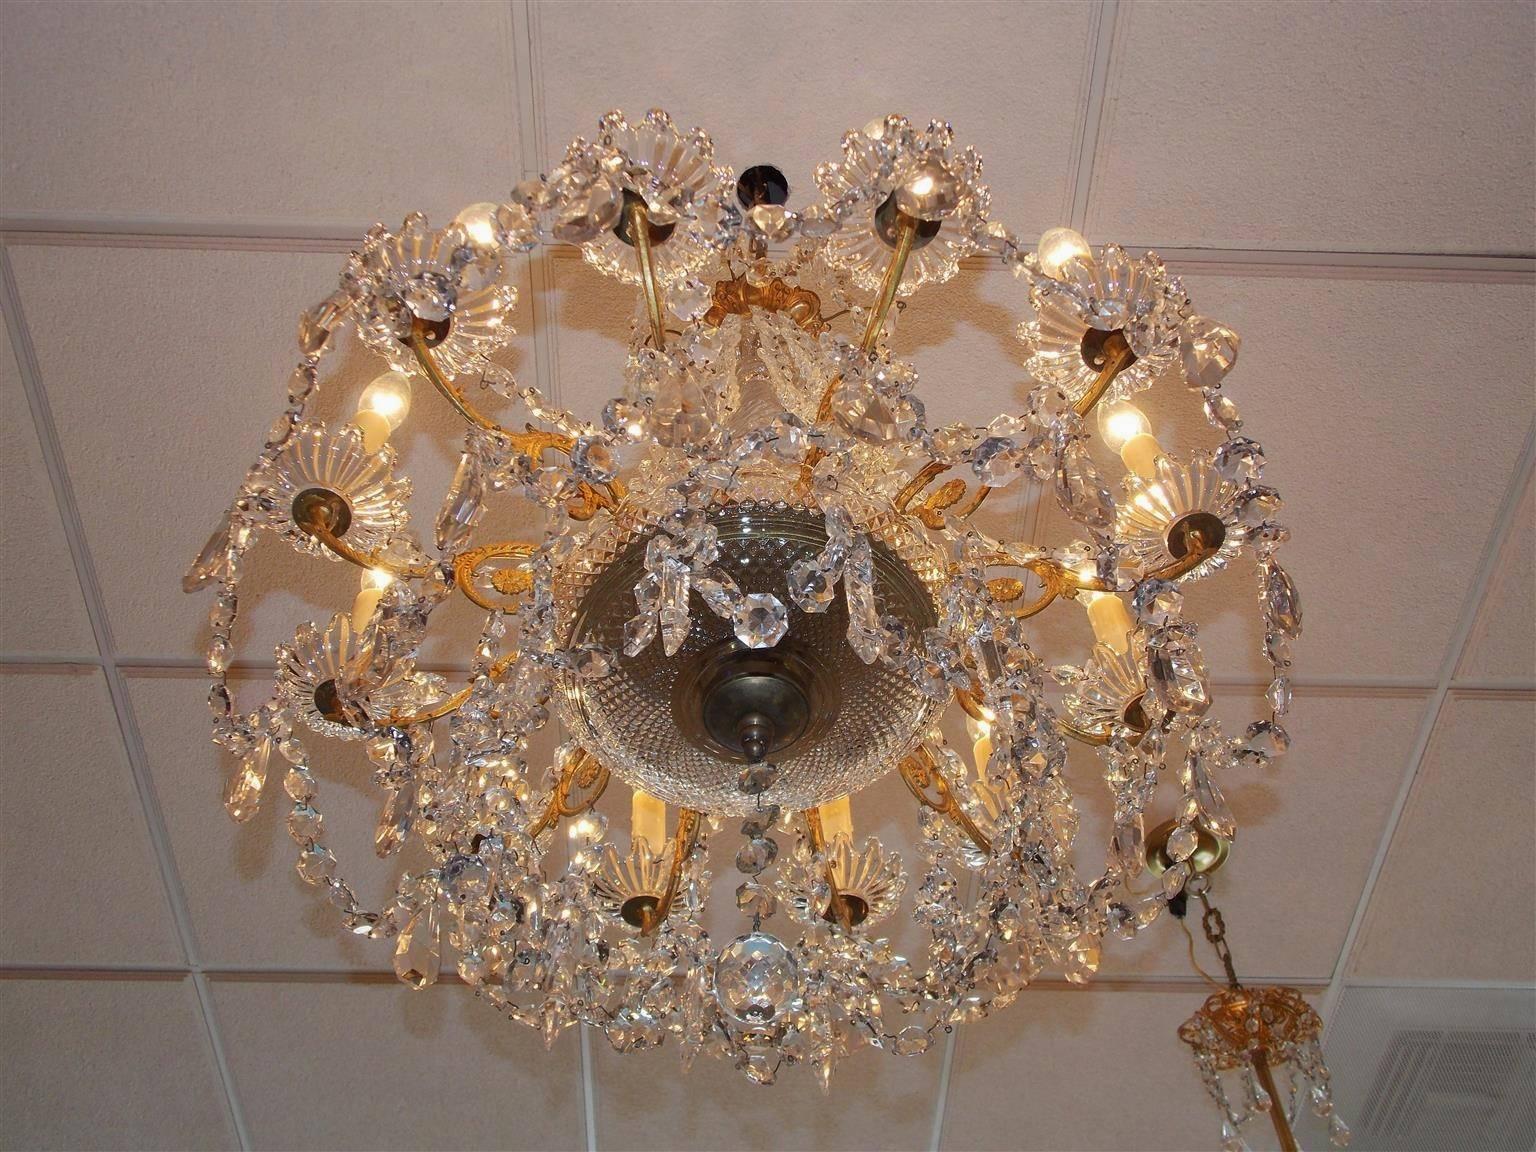 French Baccarat Gilt Bronze and Crystal Twelve-Arm Chandelier, Circa 1820 For Sale 1